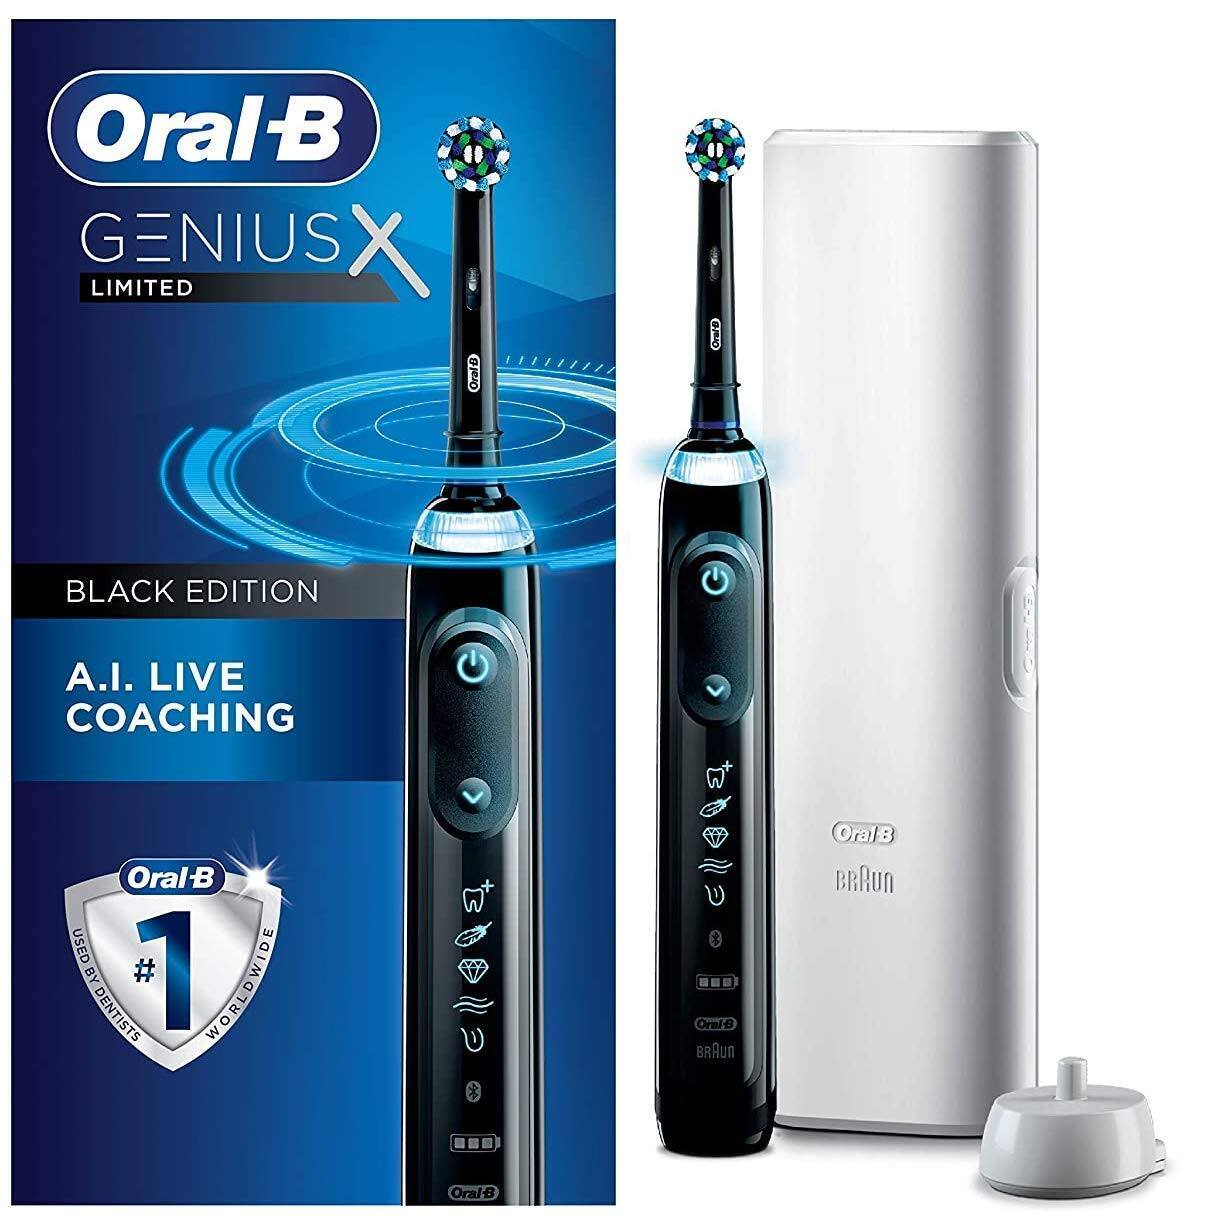 Amazon Prime Members: Oral-B Genius X Limited Electric Toothbrush w/ A.I. Live Coaching (Black, White or Purple) $100 + Free Shipping